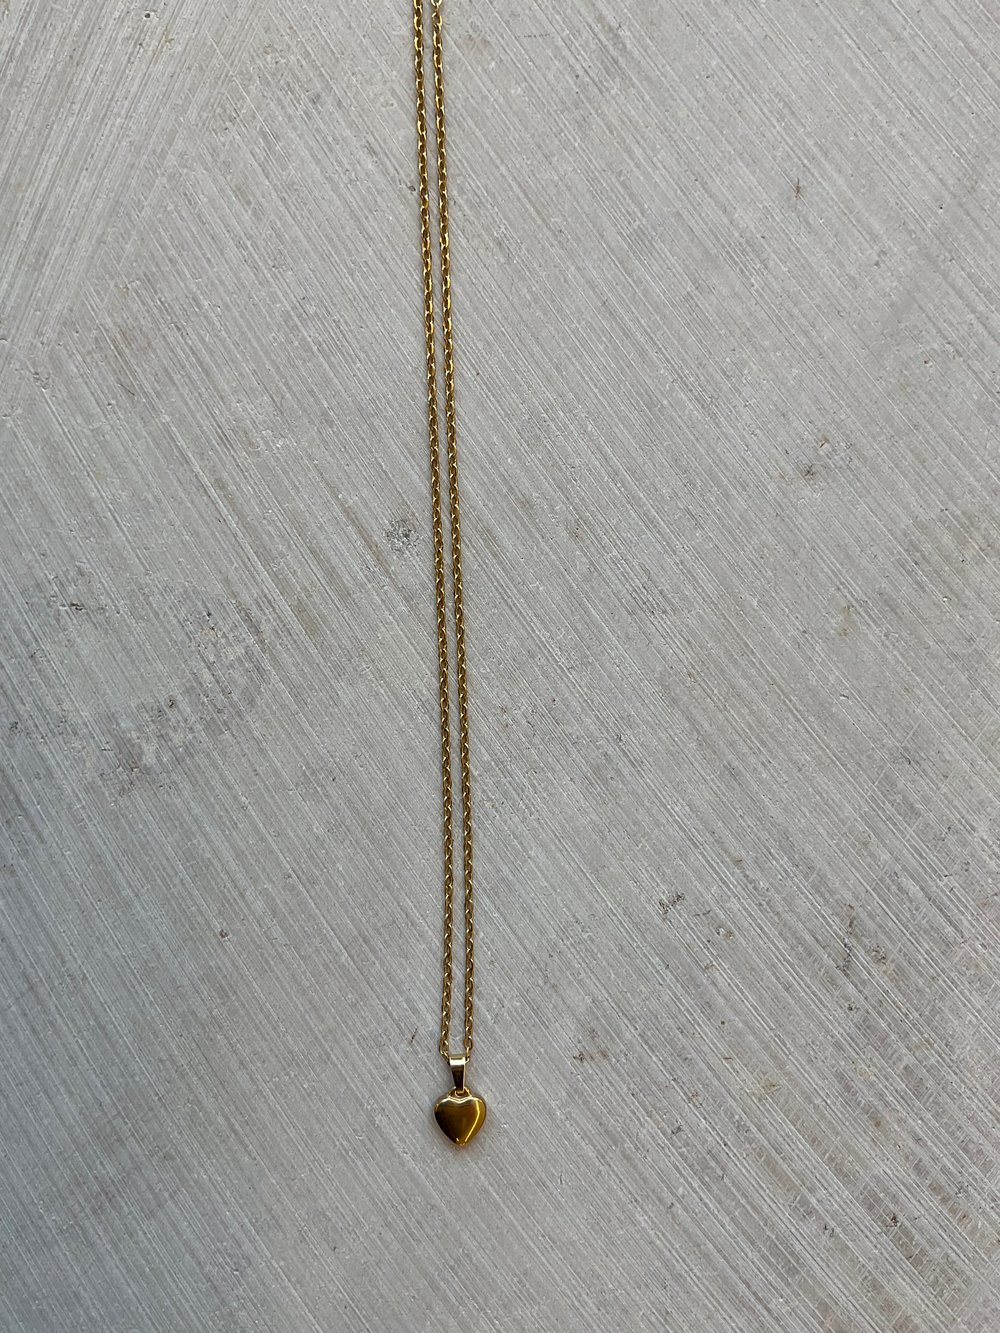 Stainless steel gold heart necklace 